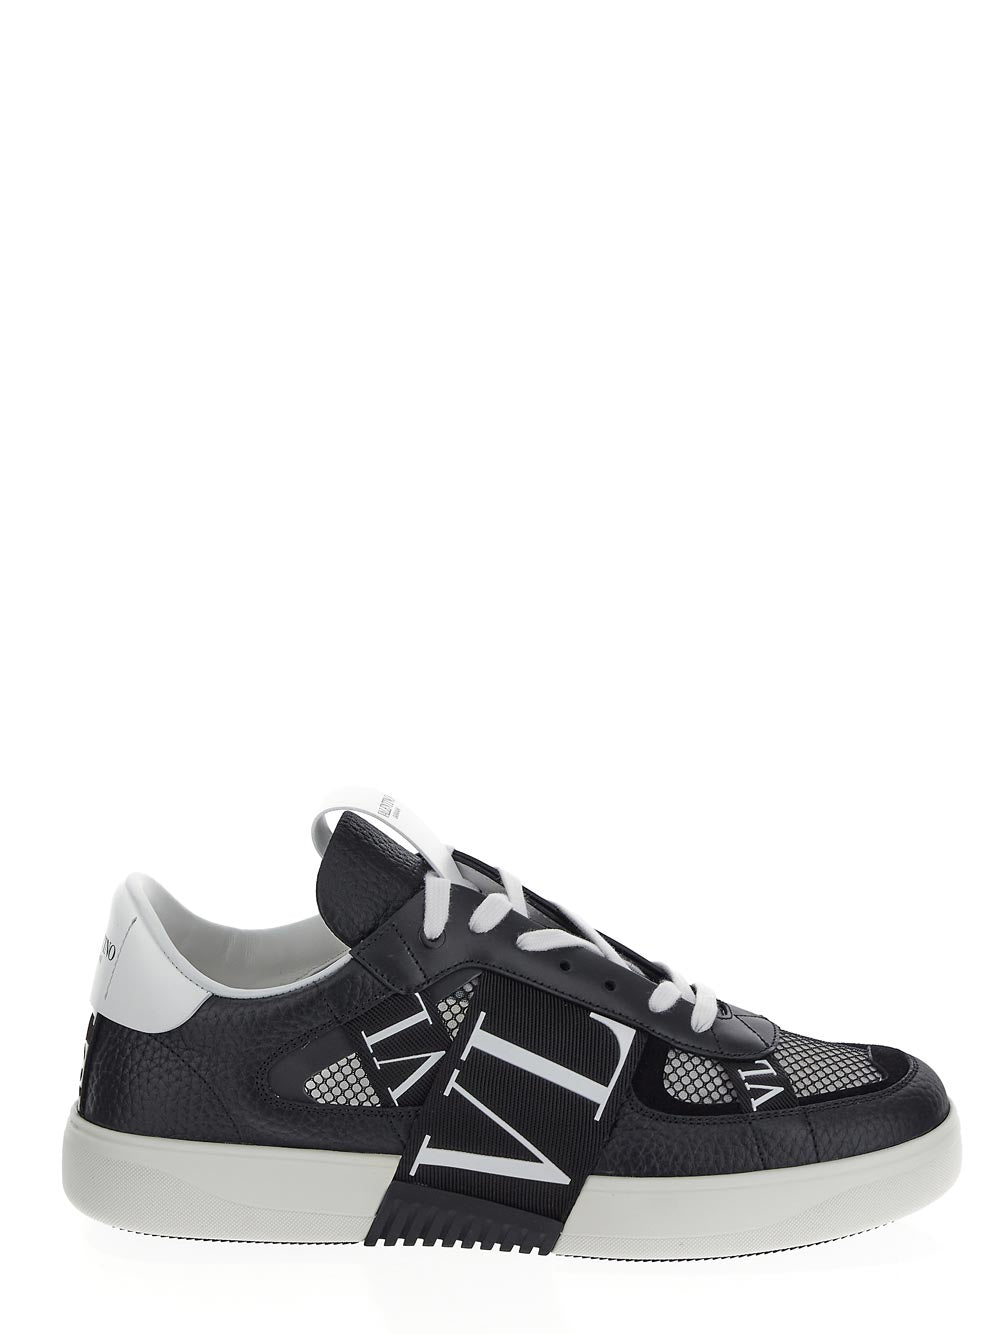 Valentino Garavani Vl7N Low-Top Sneakers In Calfskin And Mesh Fabric With Bands